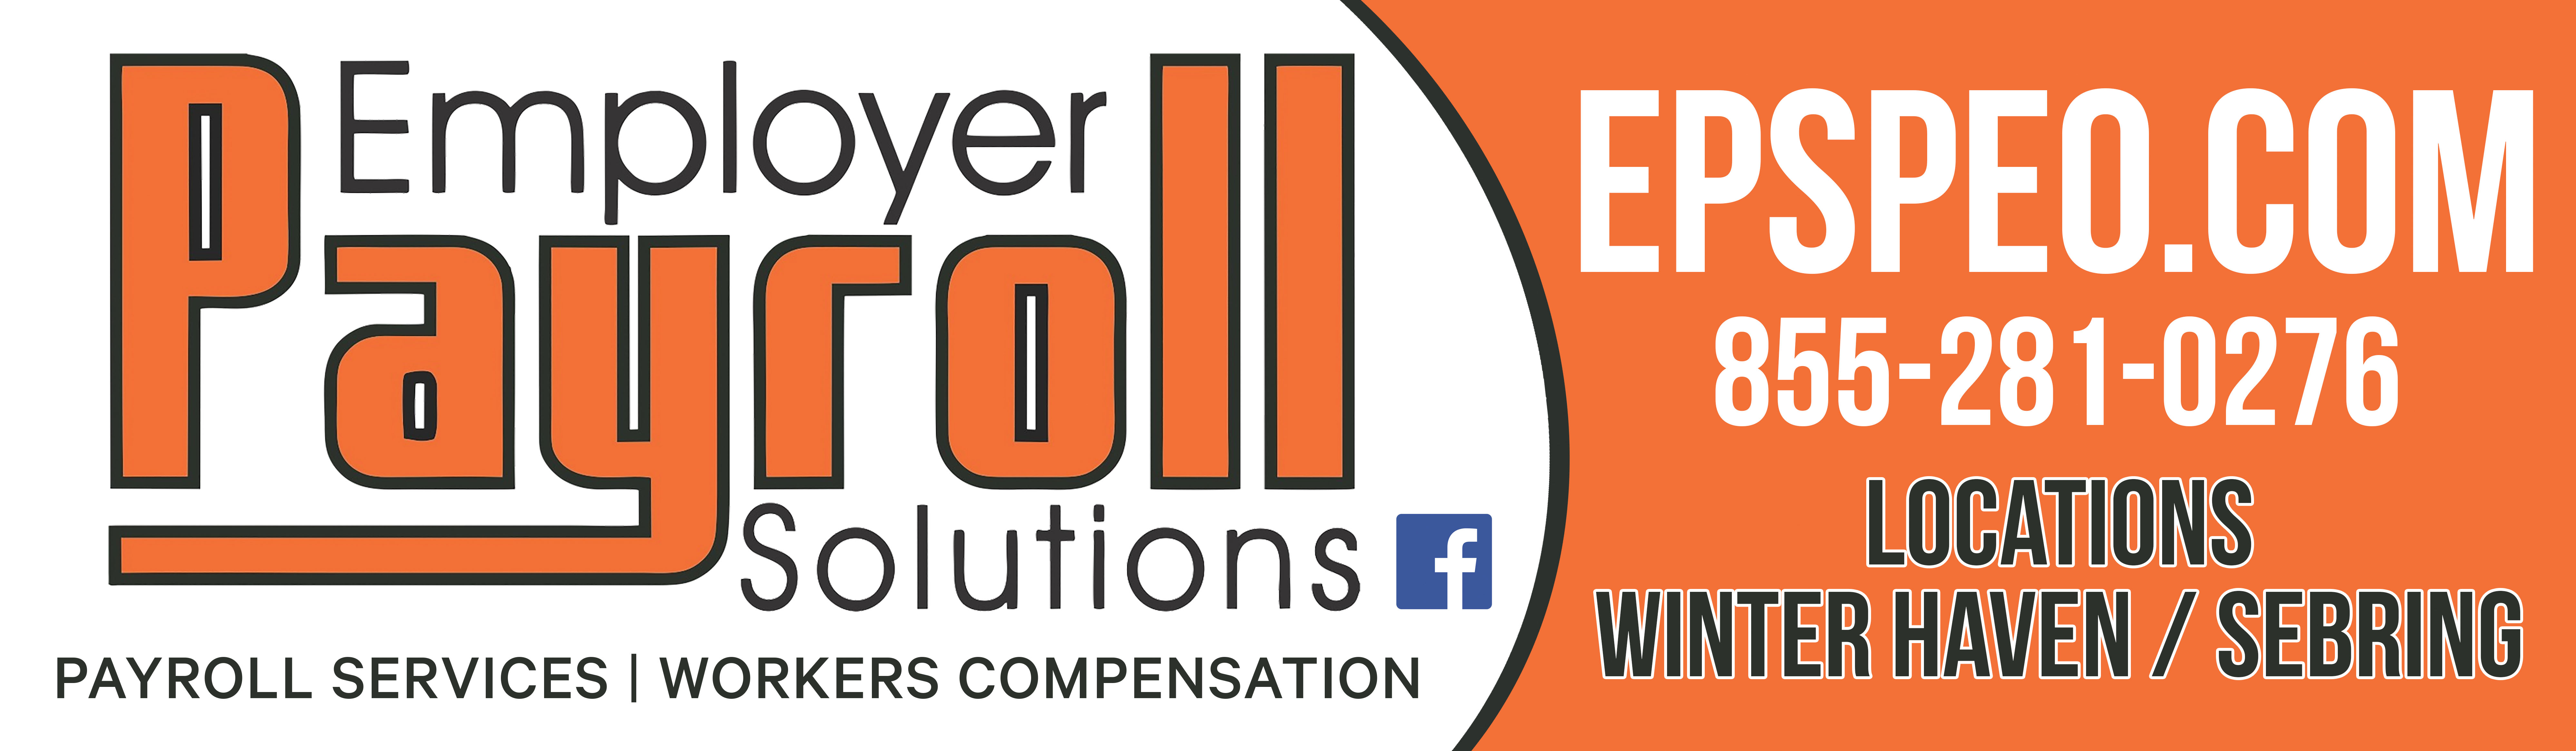 Employer Payroll Solutions Inc.